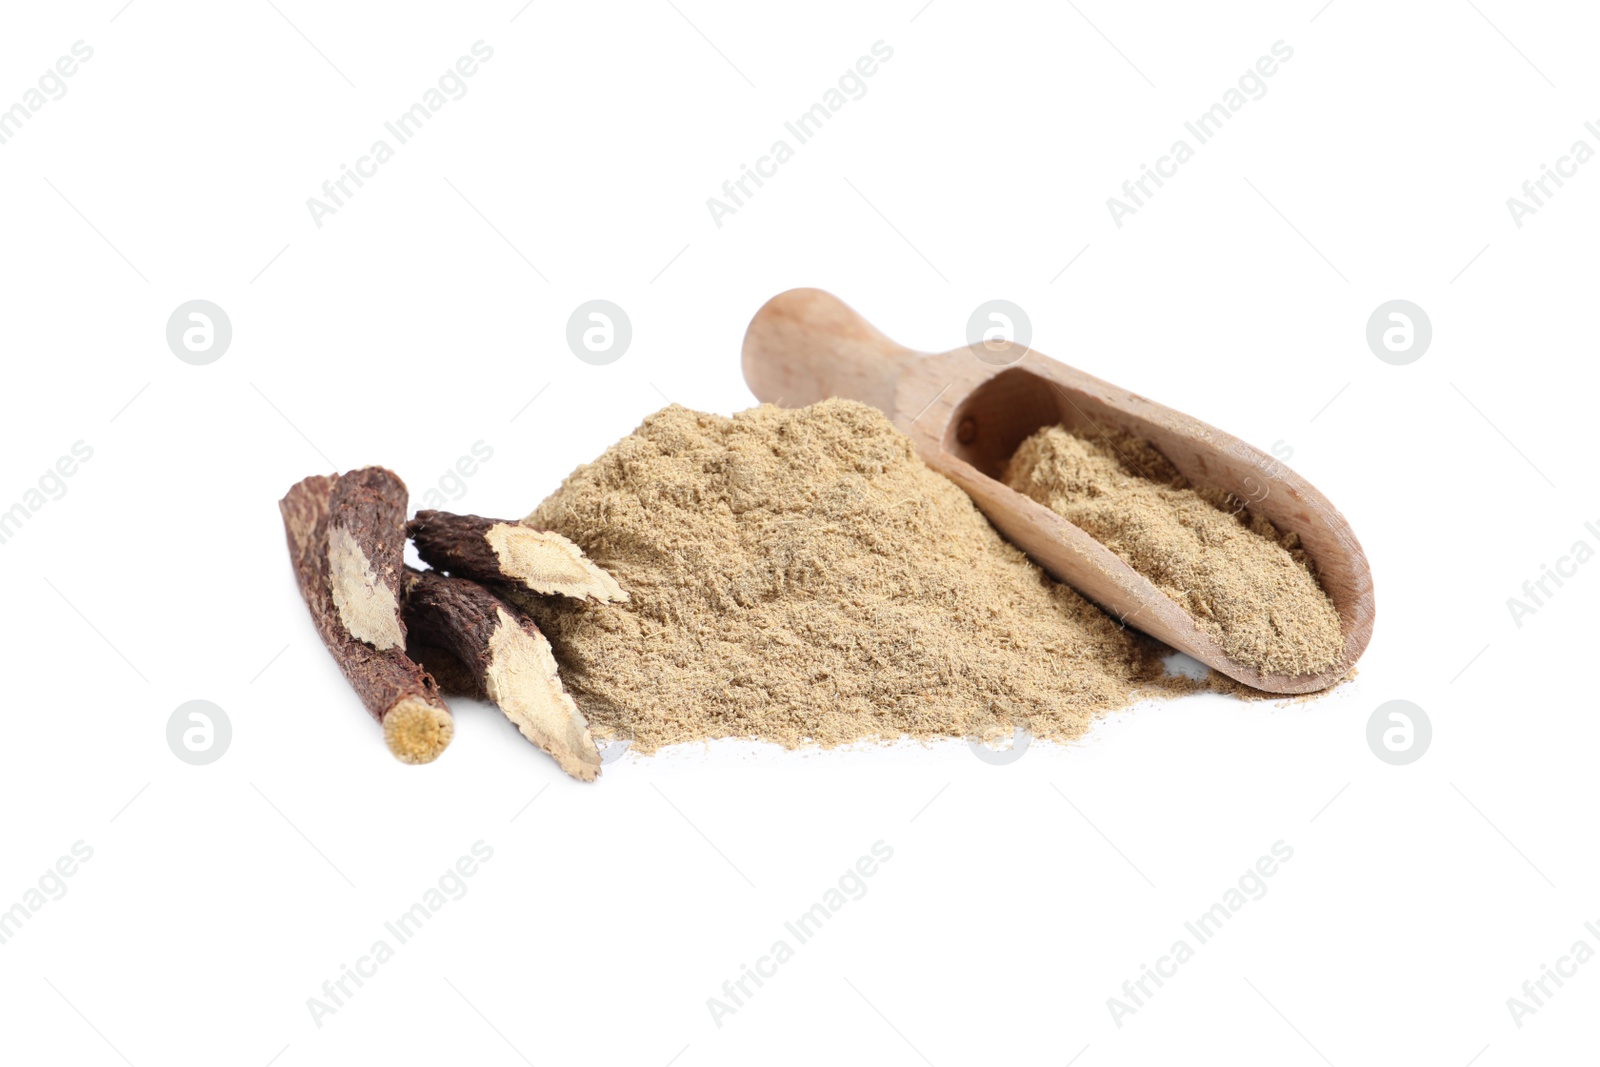 Photo of Dried sticks of liquorice root and powder on white background